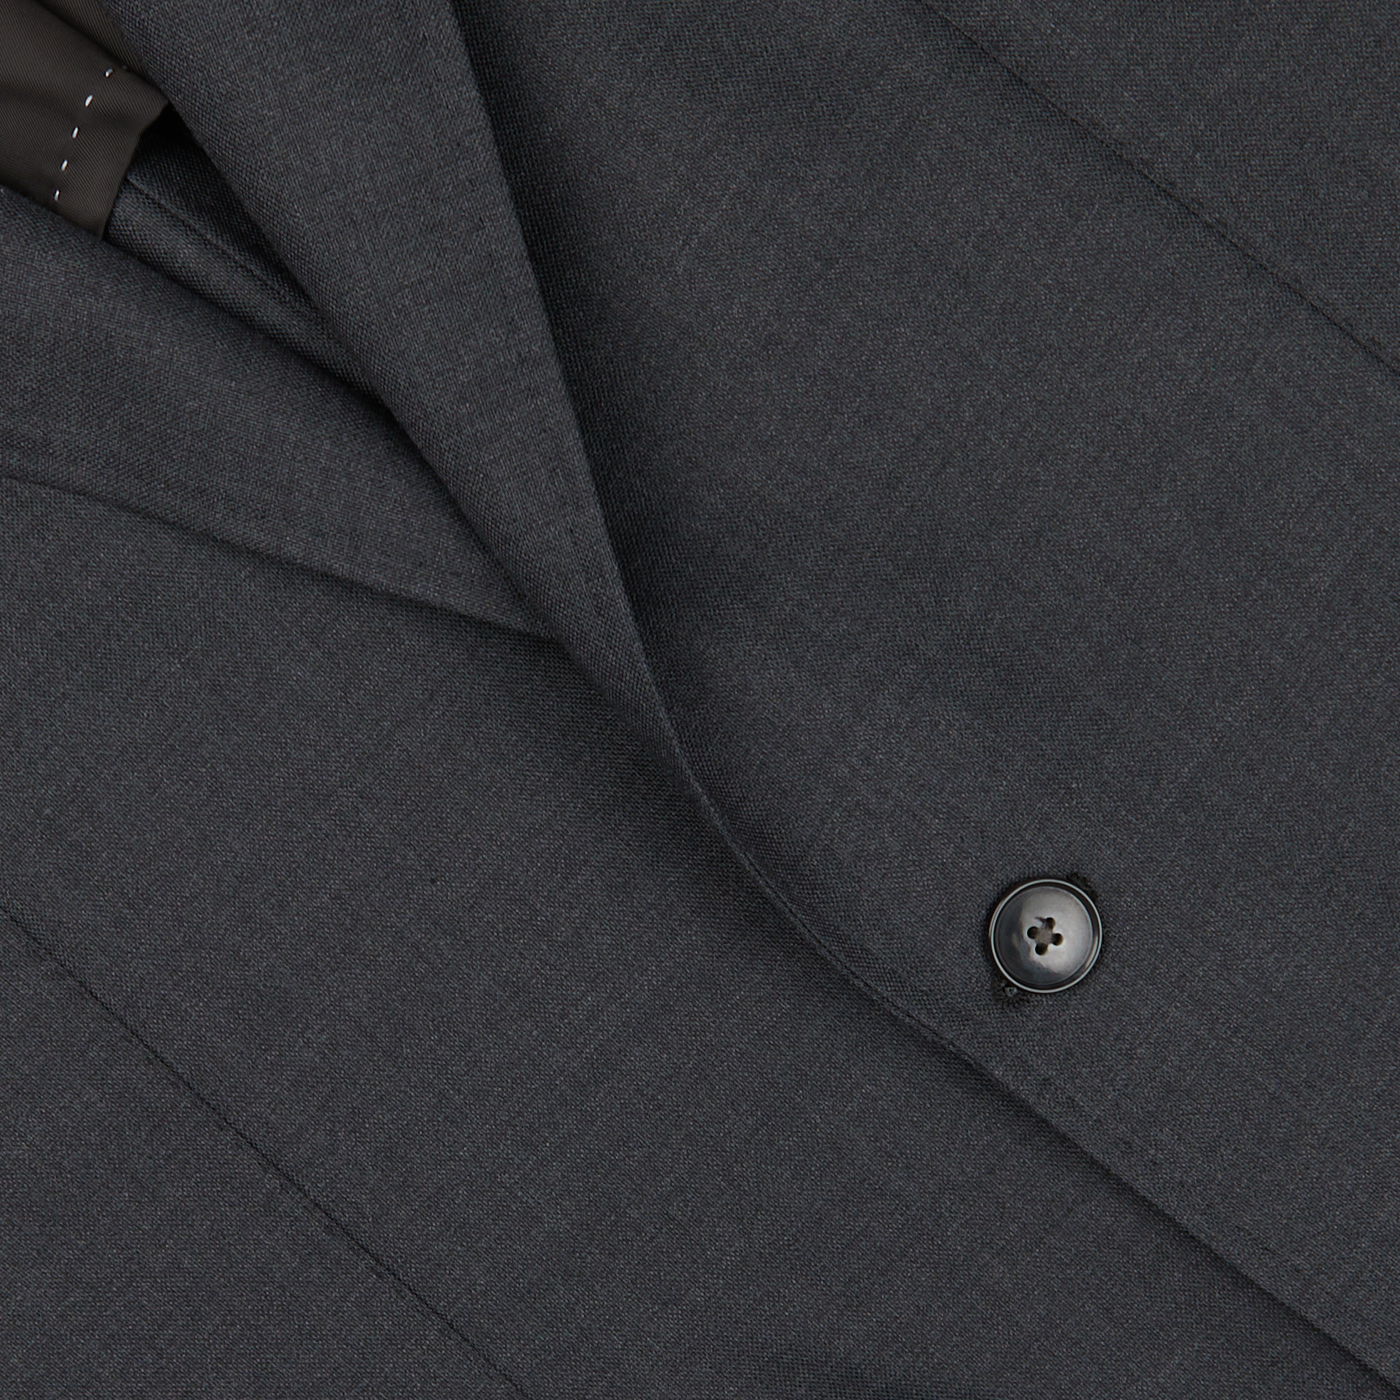 Close-up of a Baltzar Sartorial Grey Super 100's Wool Suit Jacket with detailed texture and a visible button.